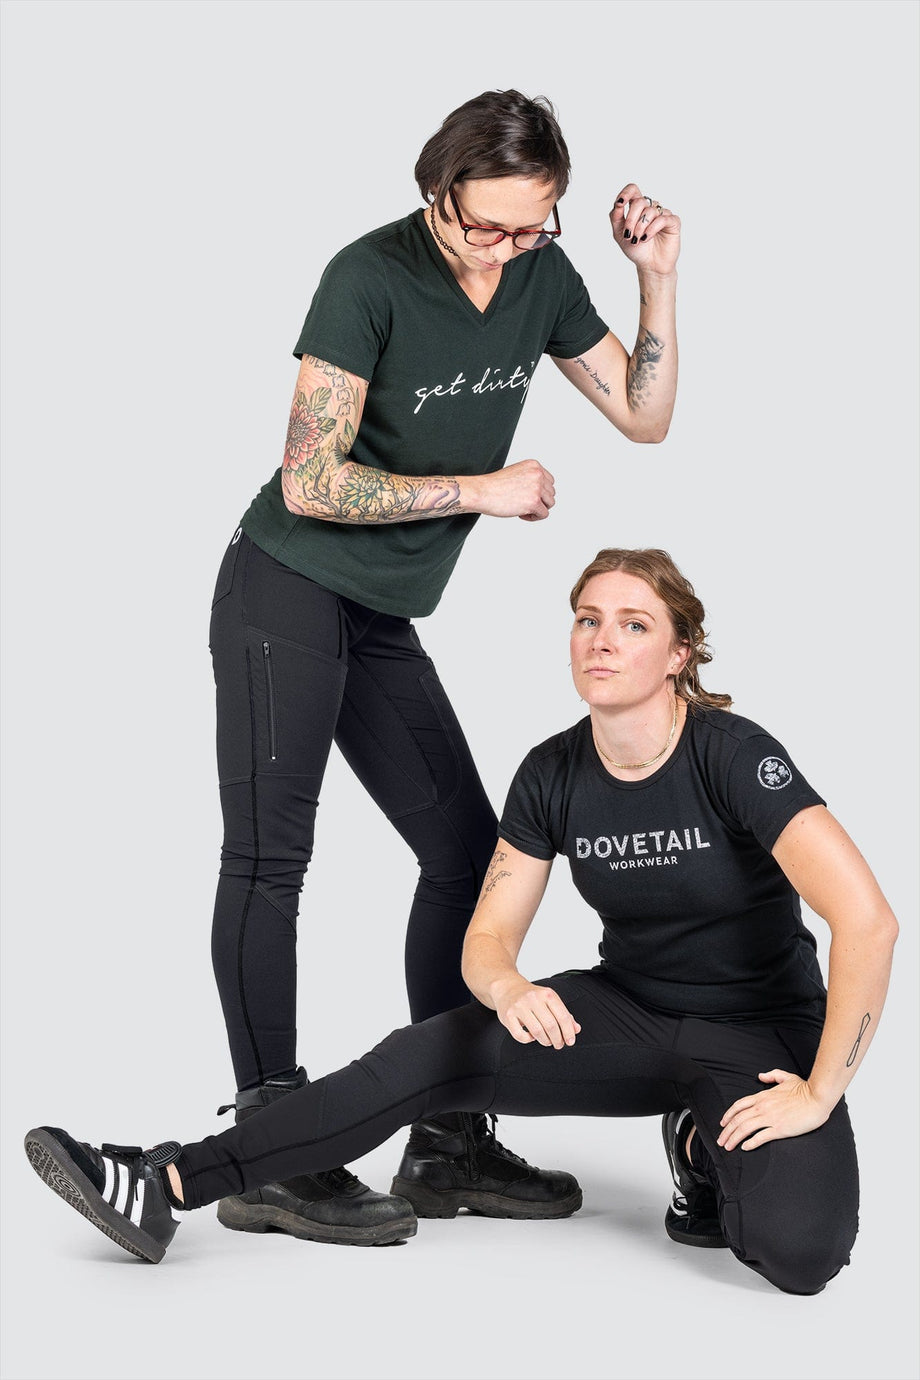 Women's Crossover Leggings with Pockets – Mallet and Field